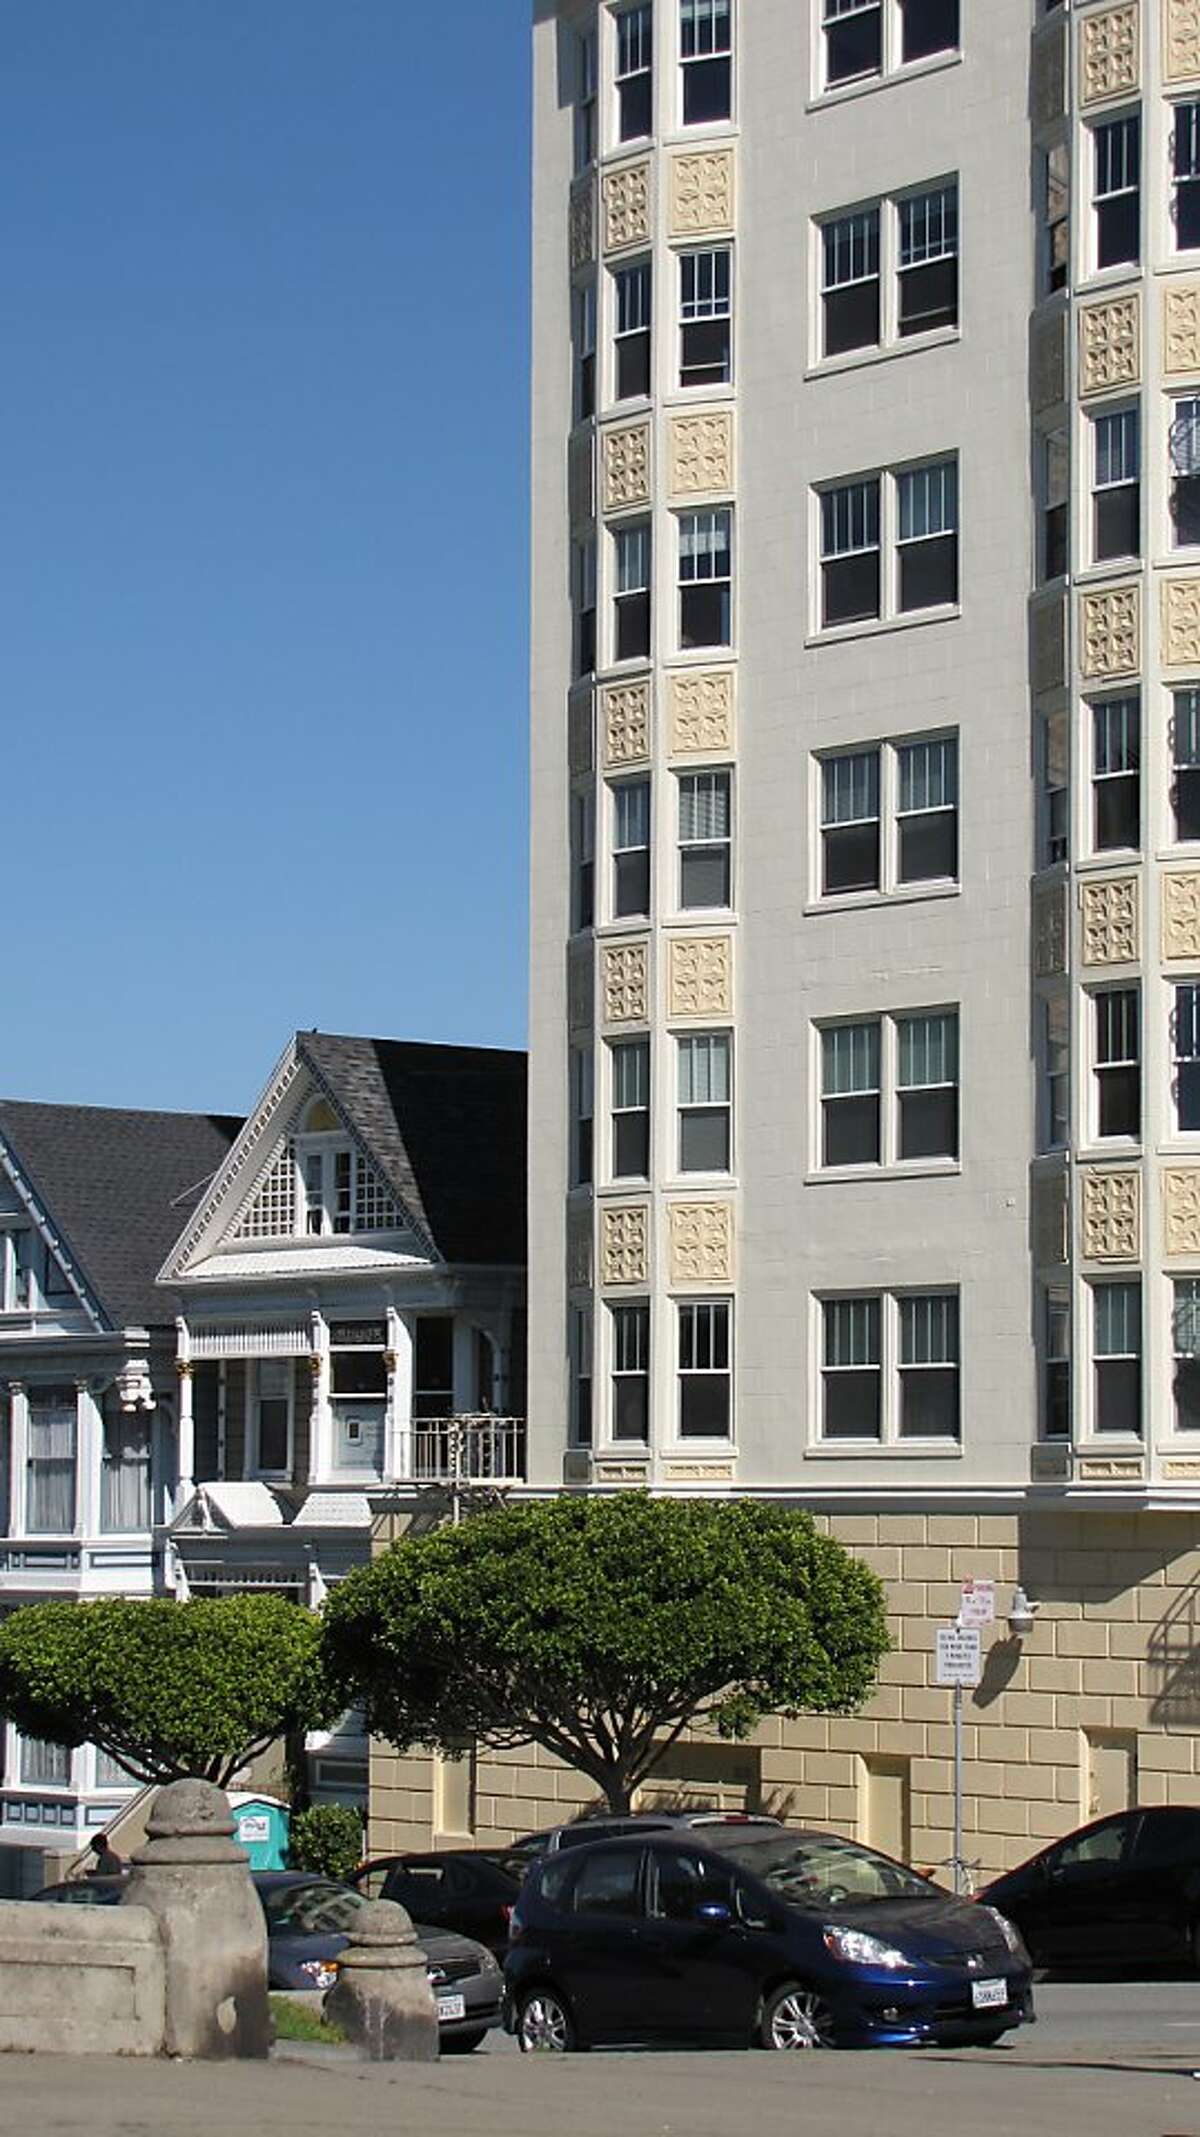 The 6-story apartment building at 700 Steiner St. opened in 1927 and was designed by Philip Harris. It stands next to the "painted ladies" of Alamo Square but is rarely photographed, despite its urbane strength.